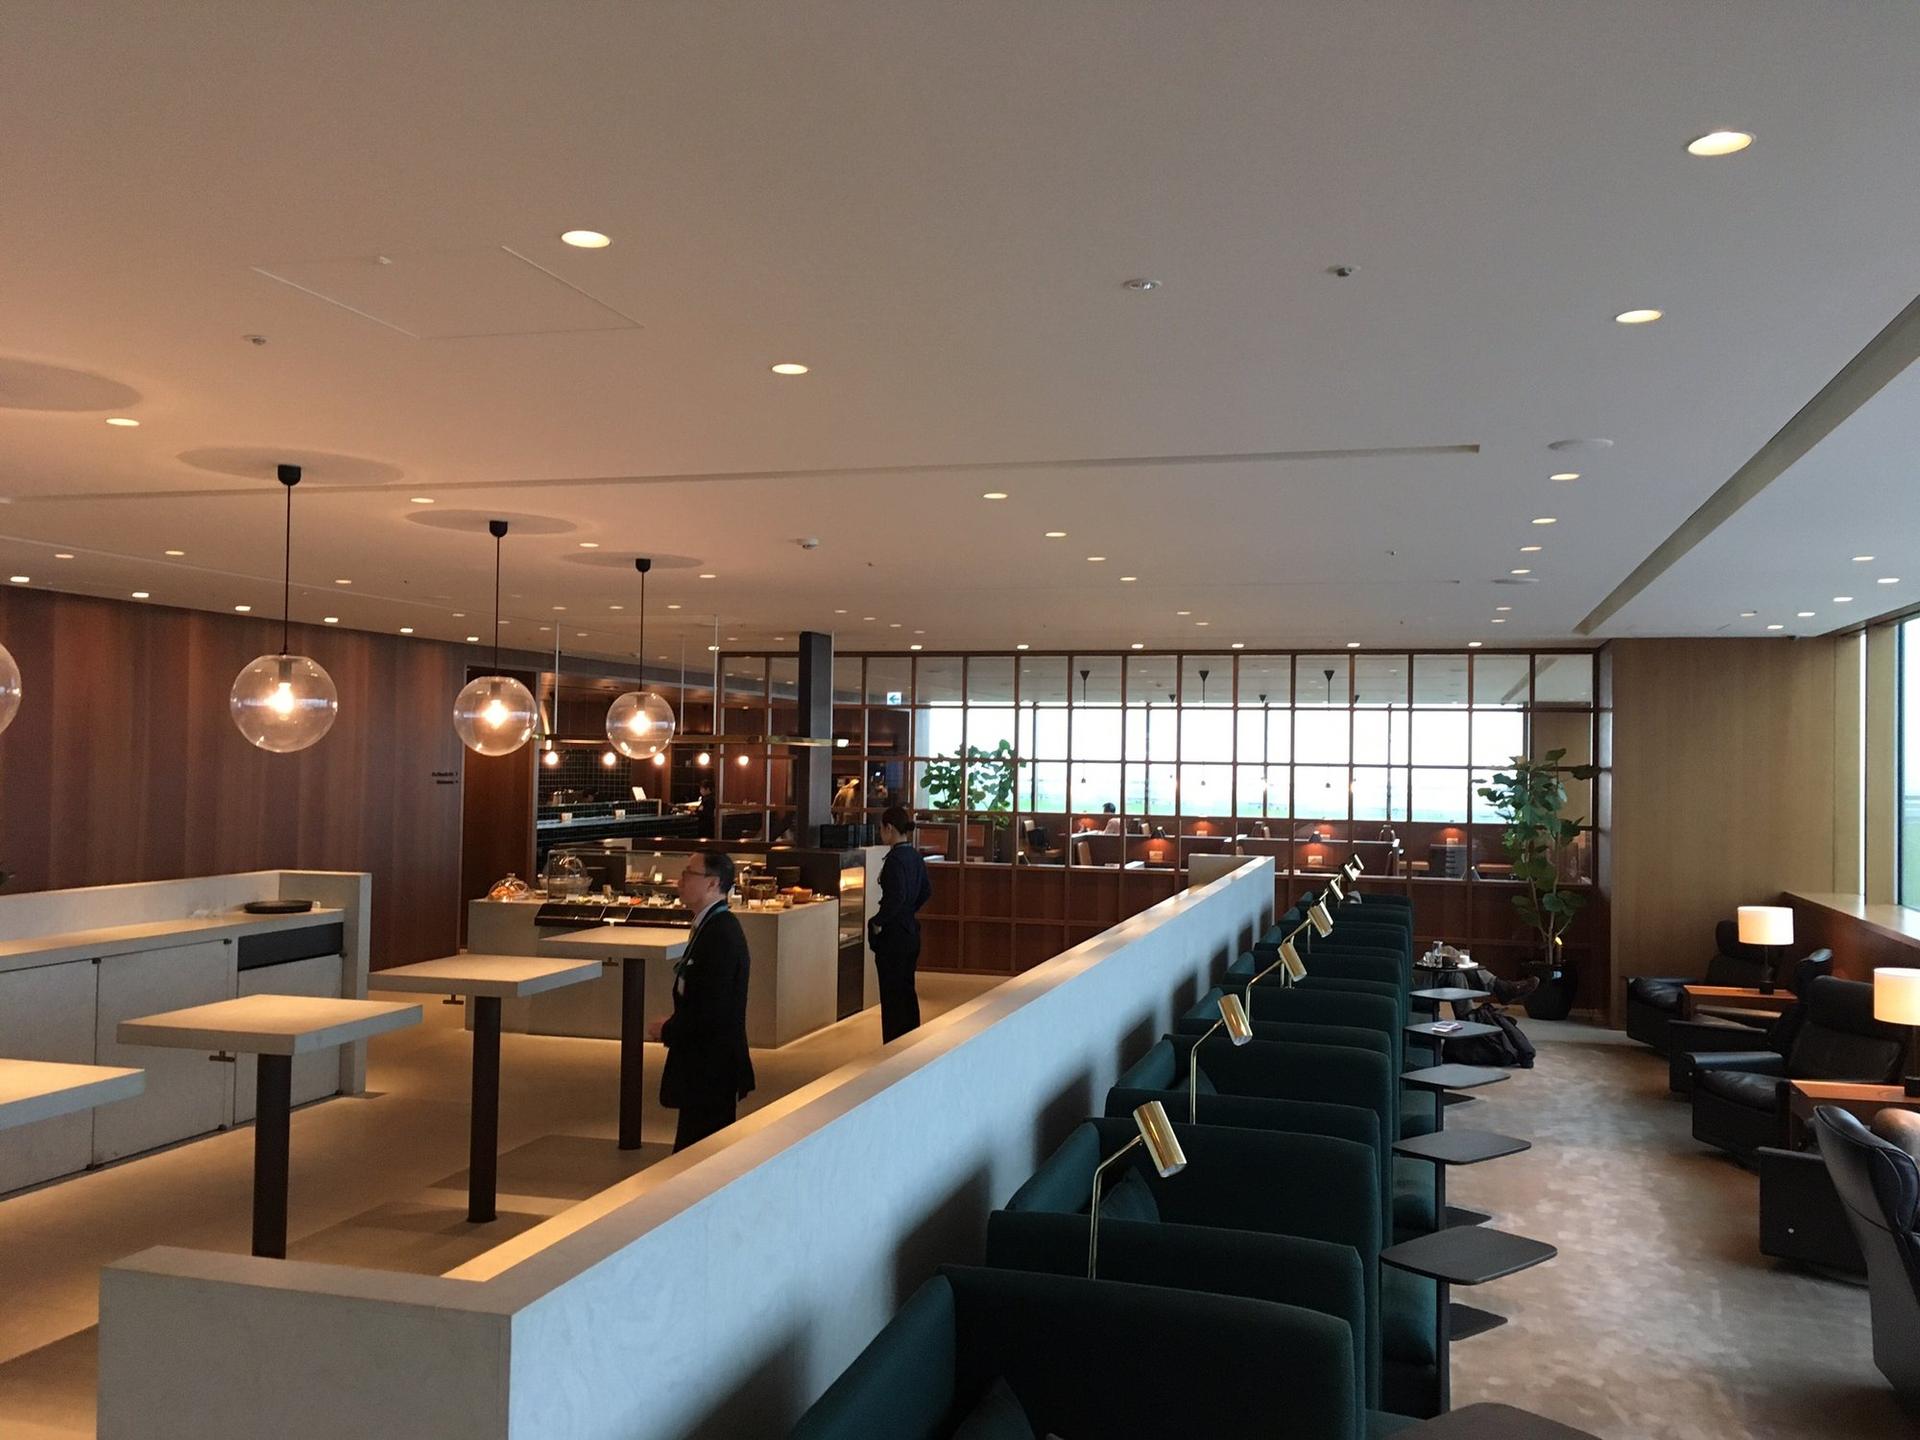 Cathay Pacific Lounge image 22 of 49